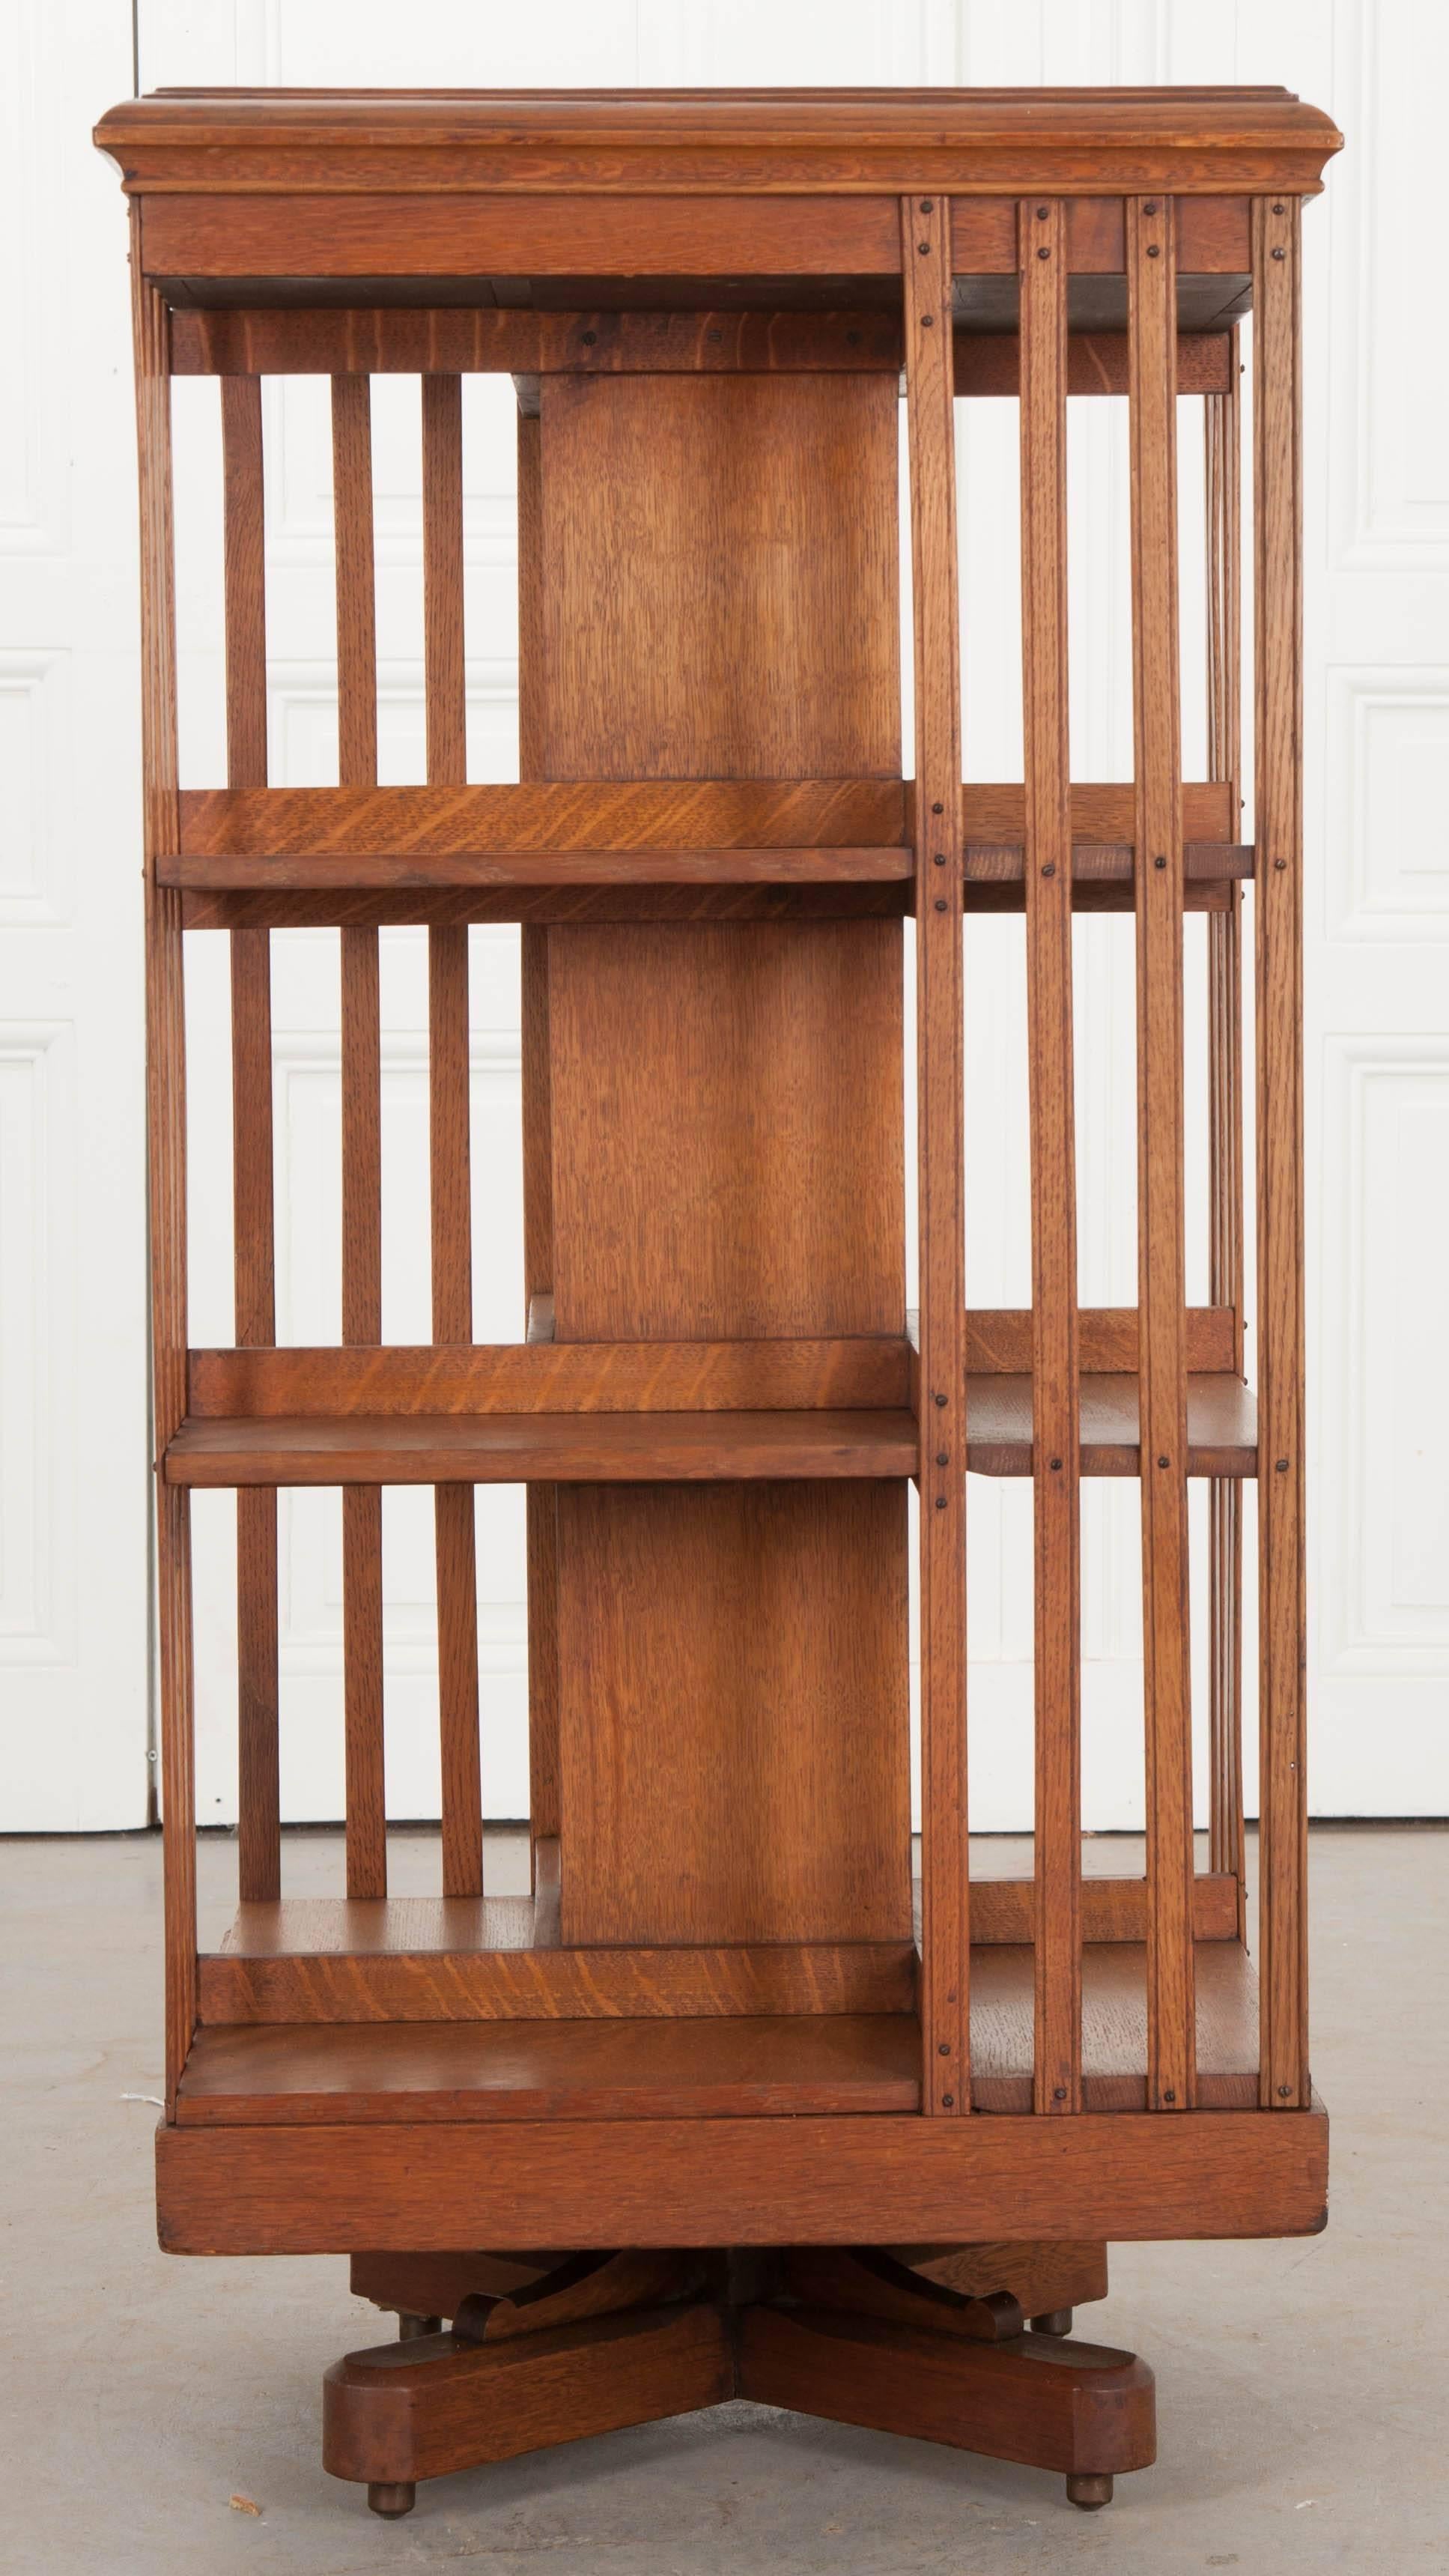 A fantastic and fun oak revolving bookcase, made in England, circa 1870. This bookcase was made by S & H Jewell, a quality, family-owned cabinet making company from west central London. The antique bookcase was made using solid quarter sawn oak. The